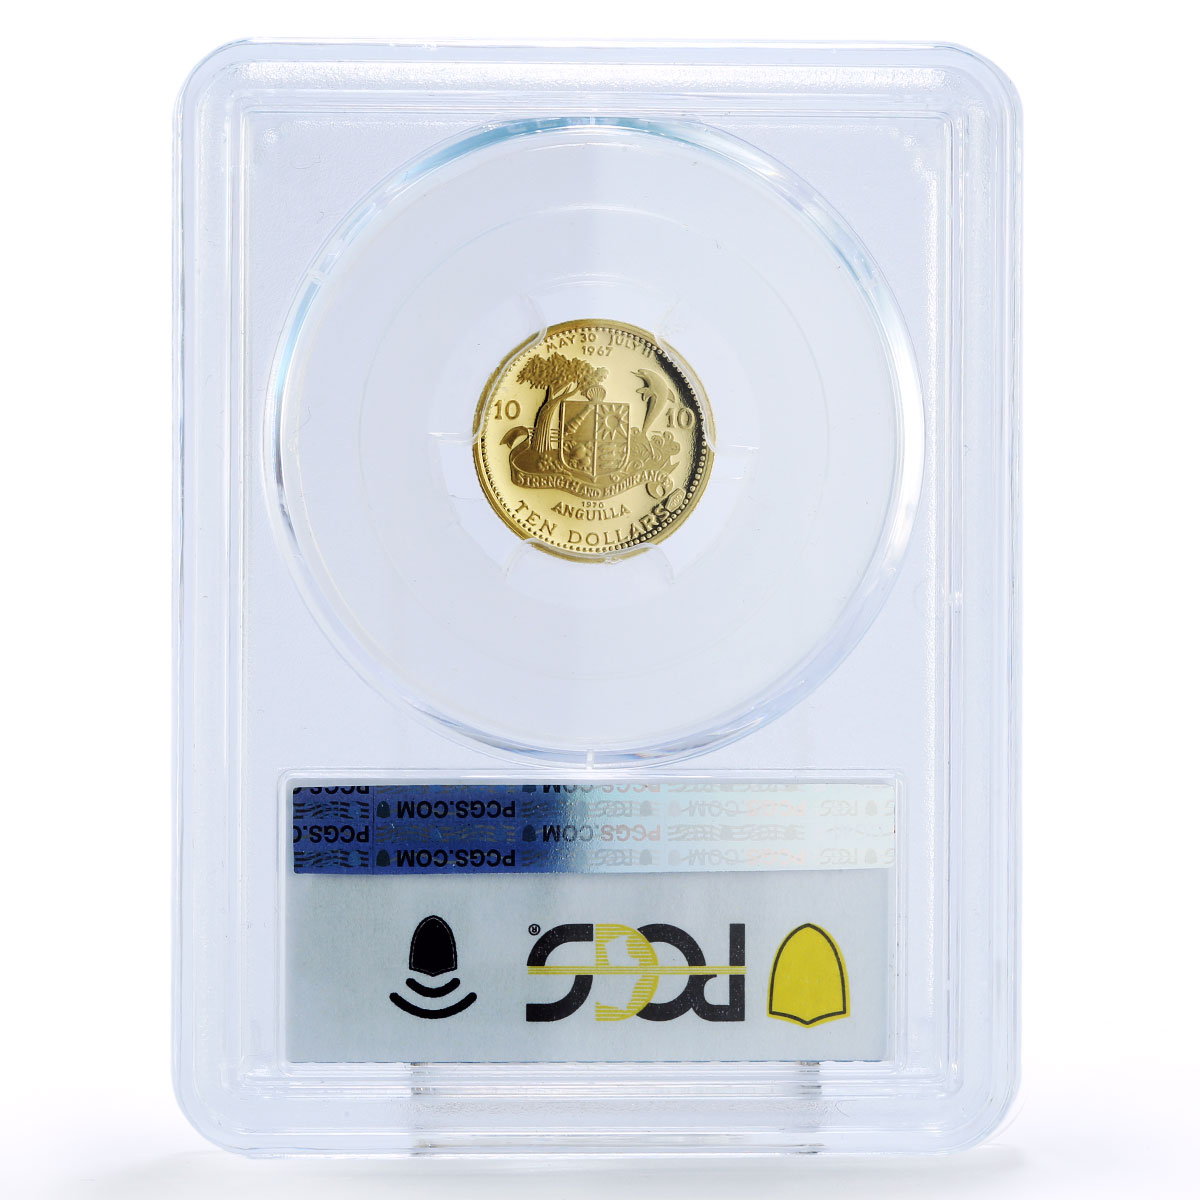 Anguilla 10 dollars Caribbean Sealife Dolphin Lobster PR69 PCGS gold coin 1970